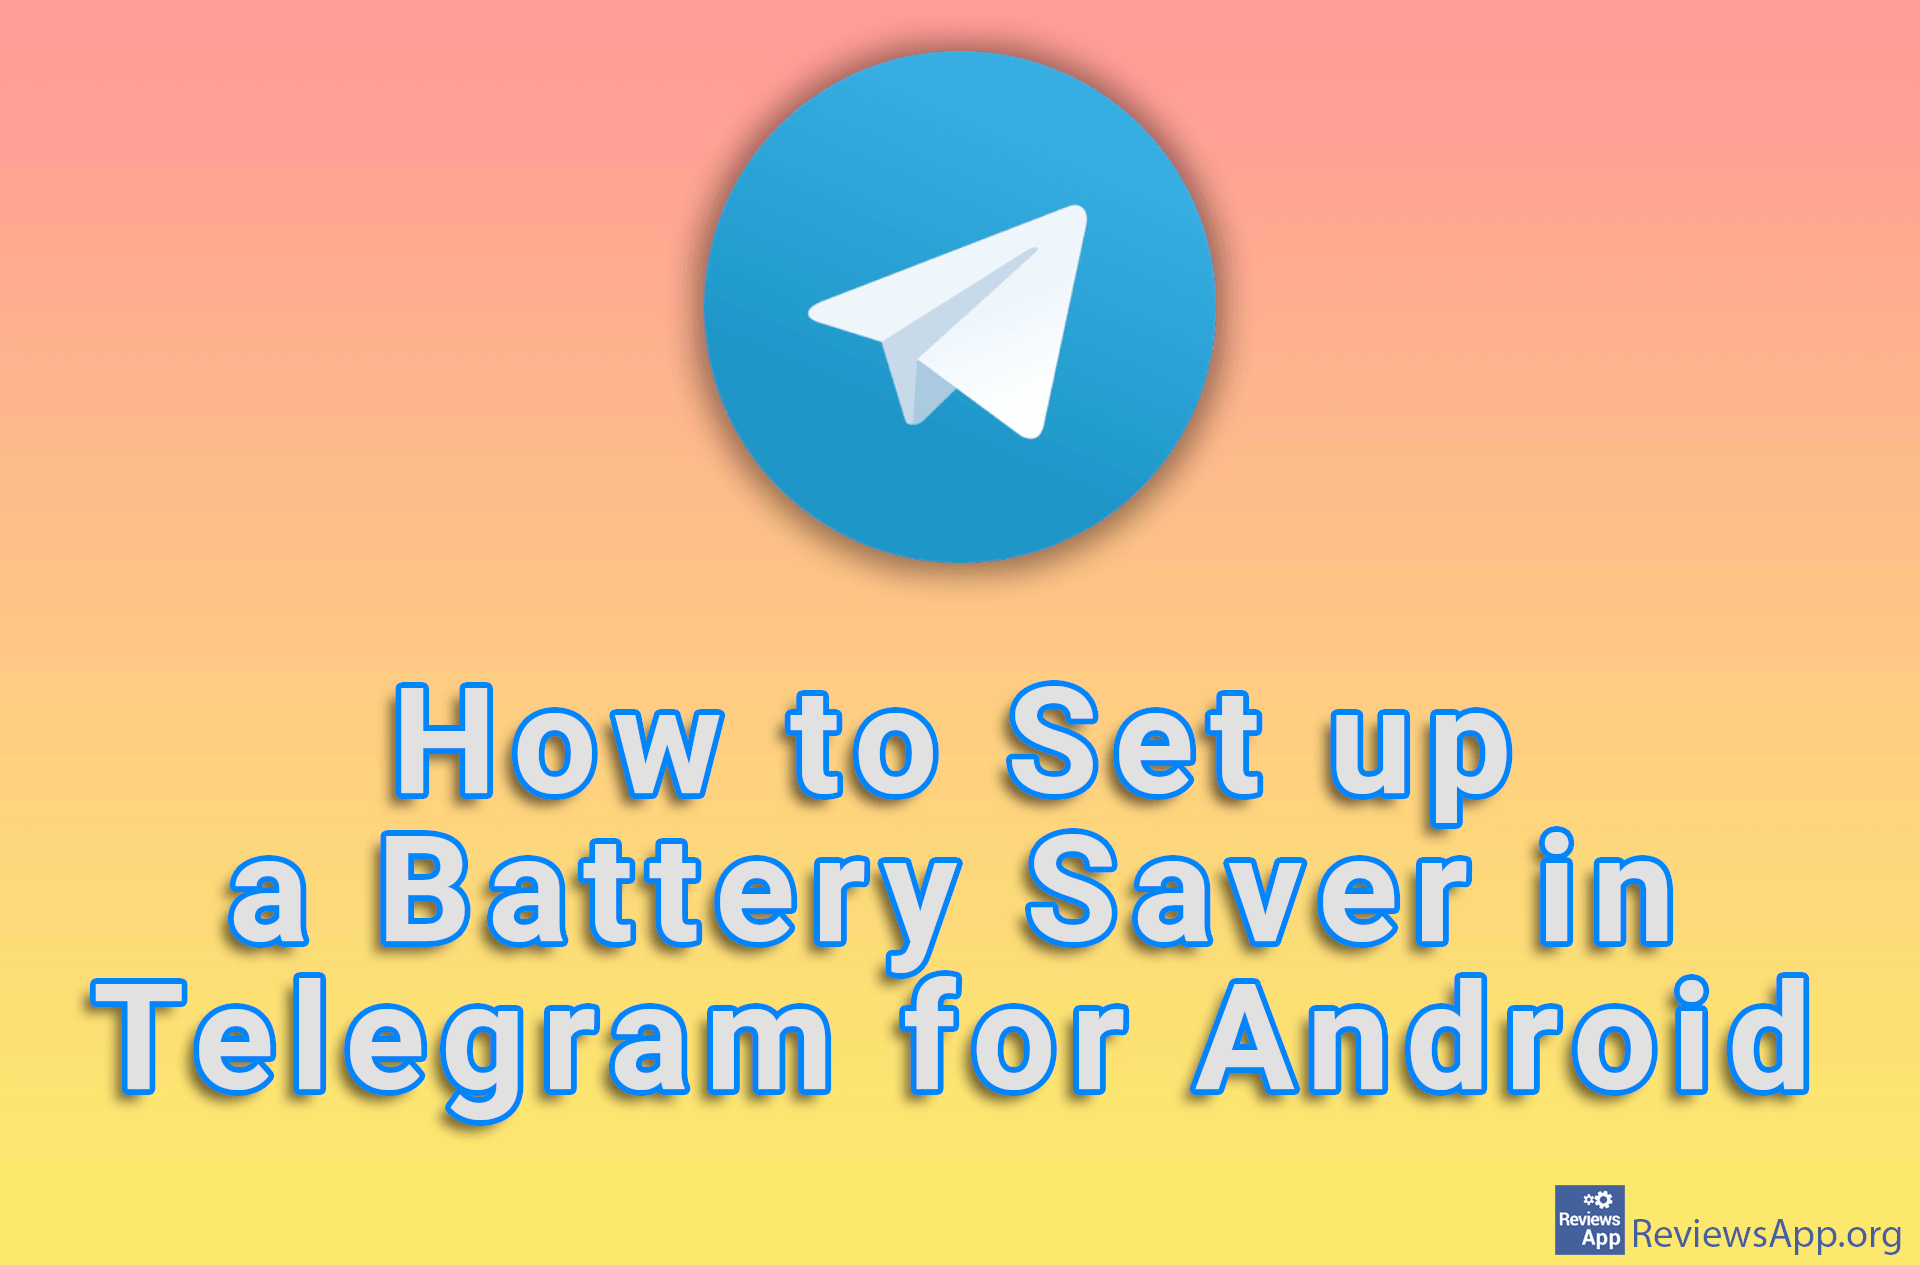 How to Set up a Battery Saver in Telegram for Android